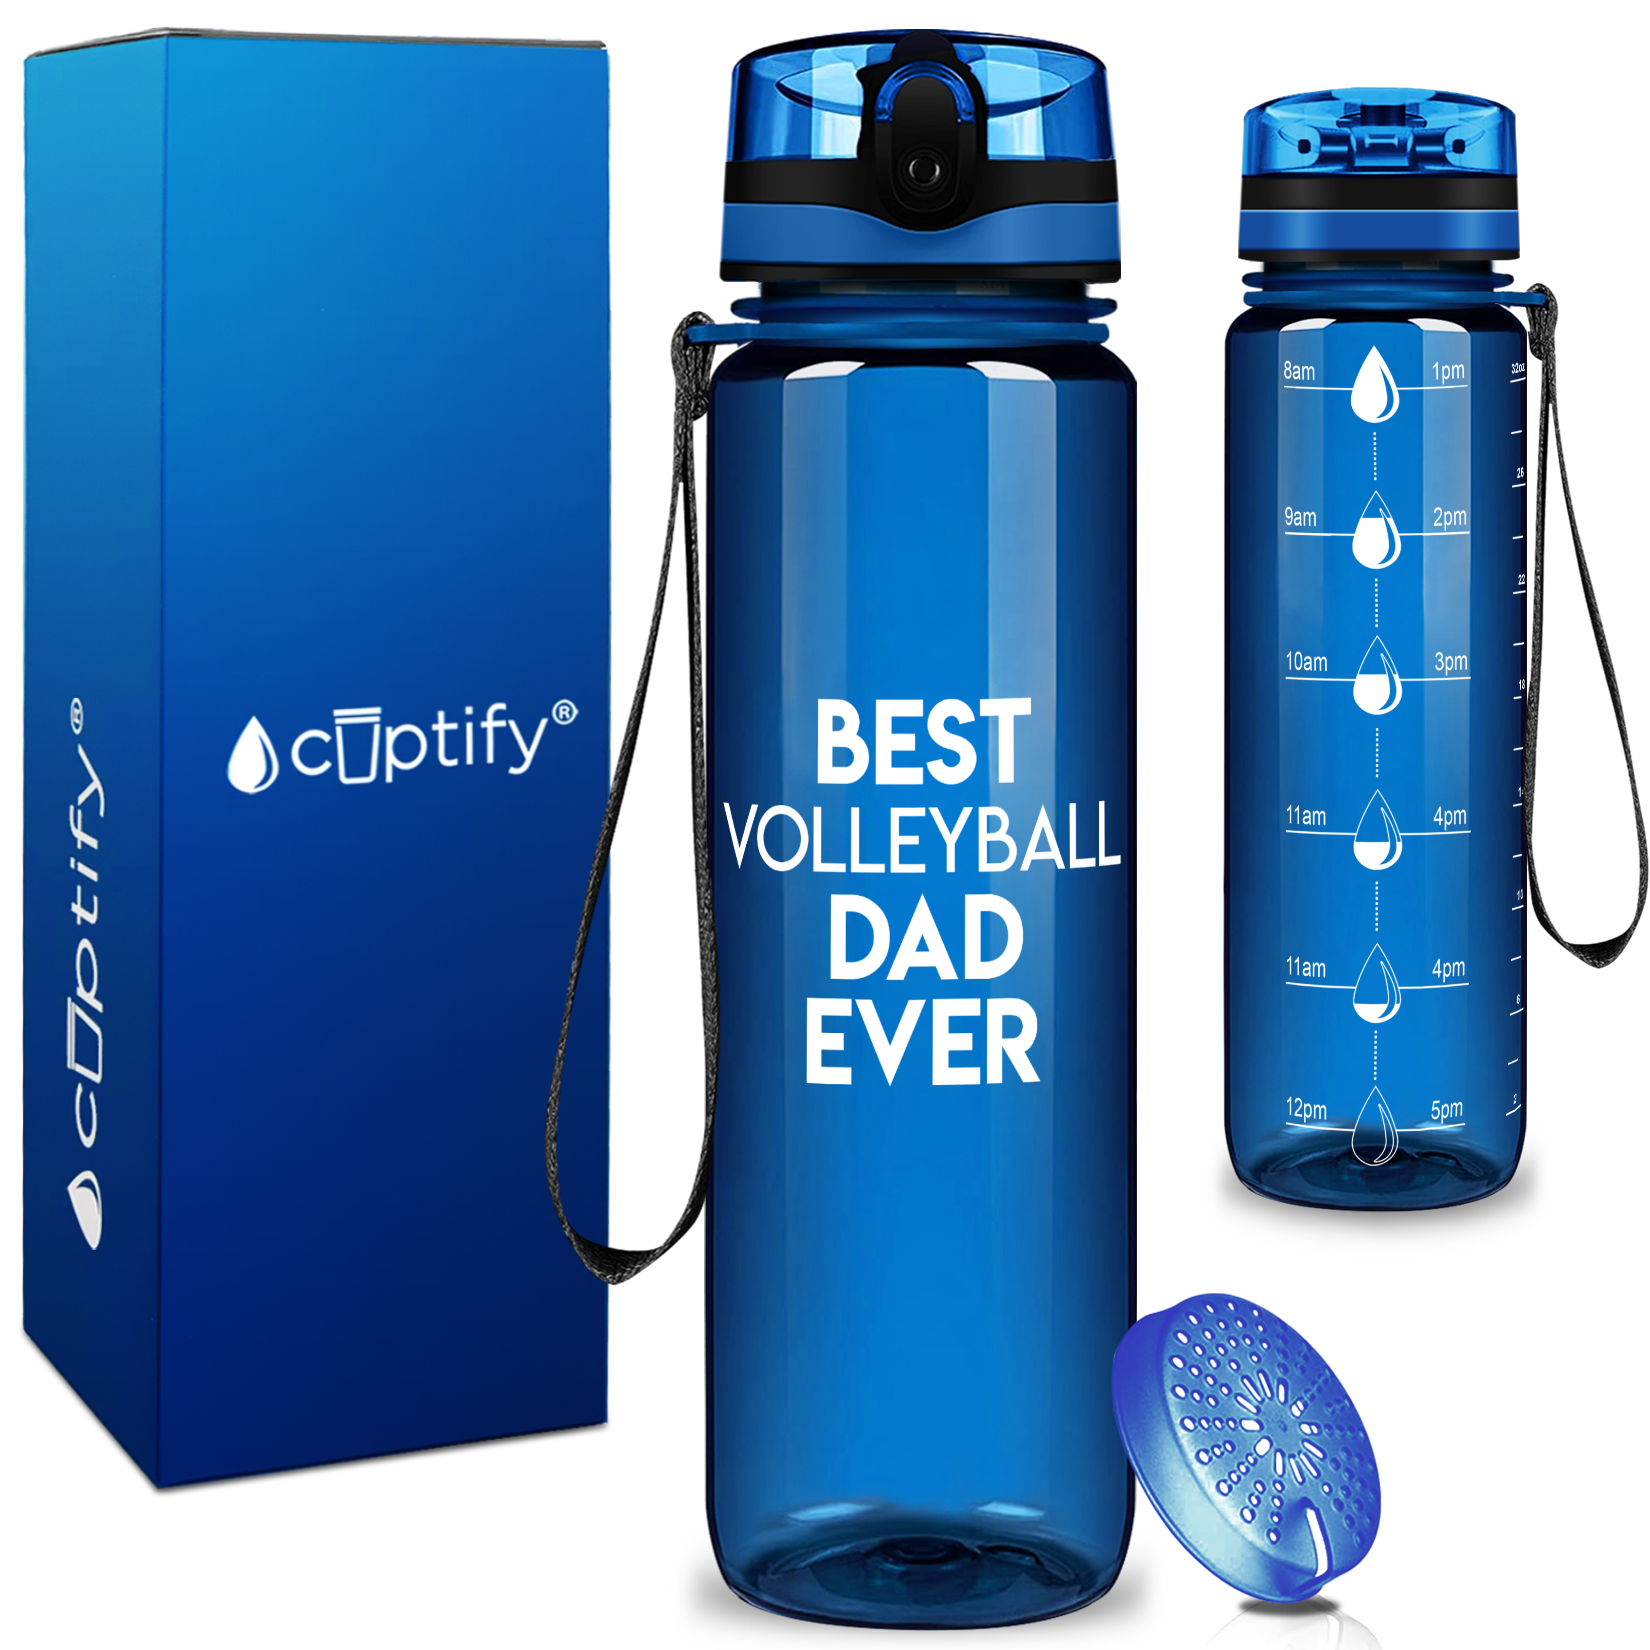 Best Volleyball Dad Ever on 32 oz Motivational Tracking Water Bottle